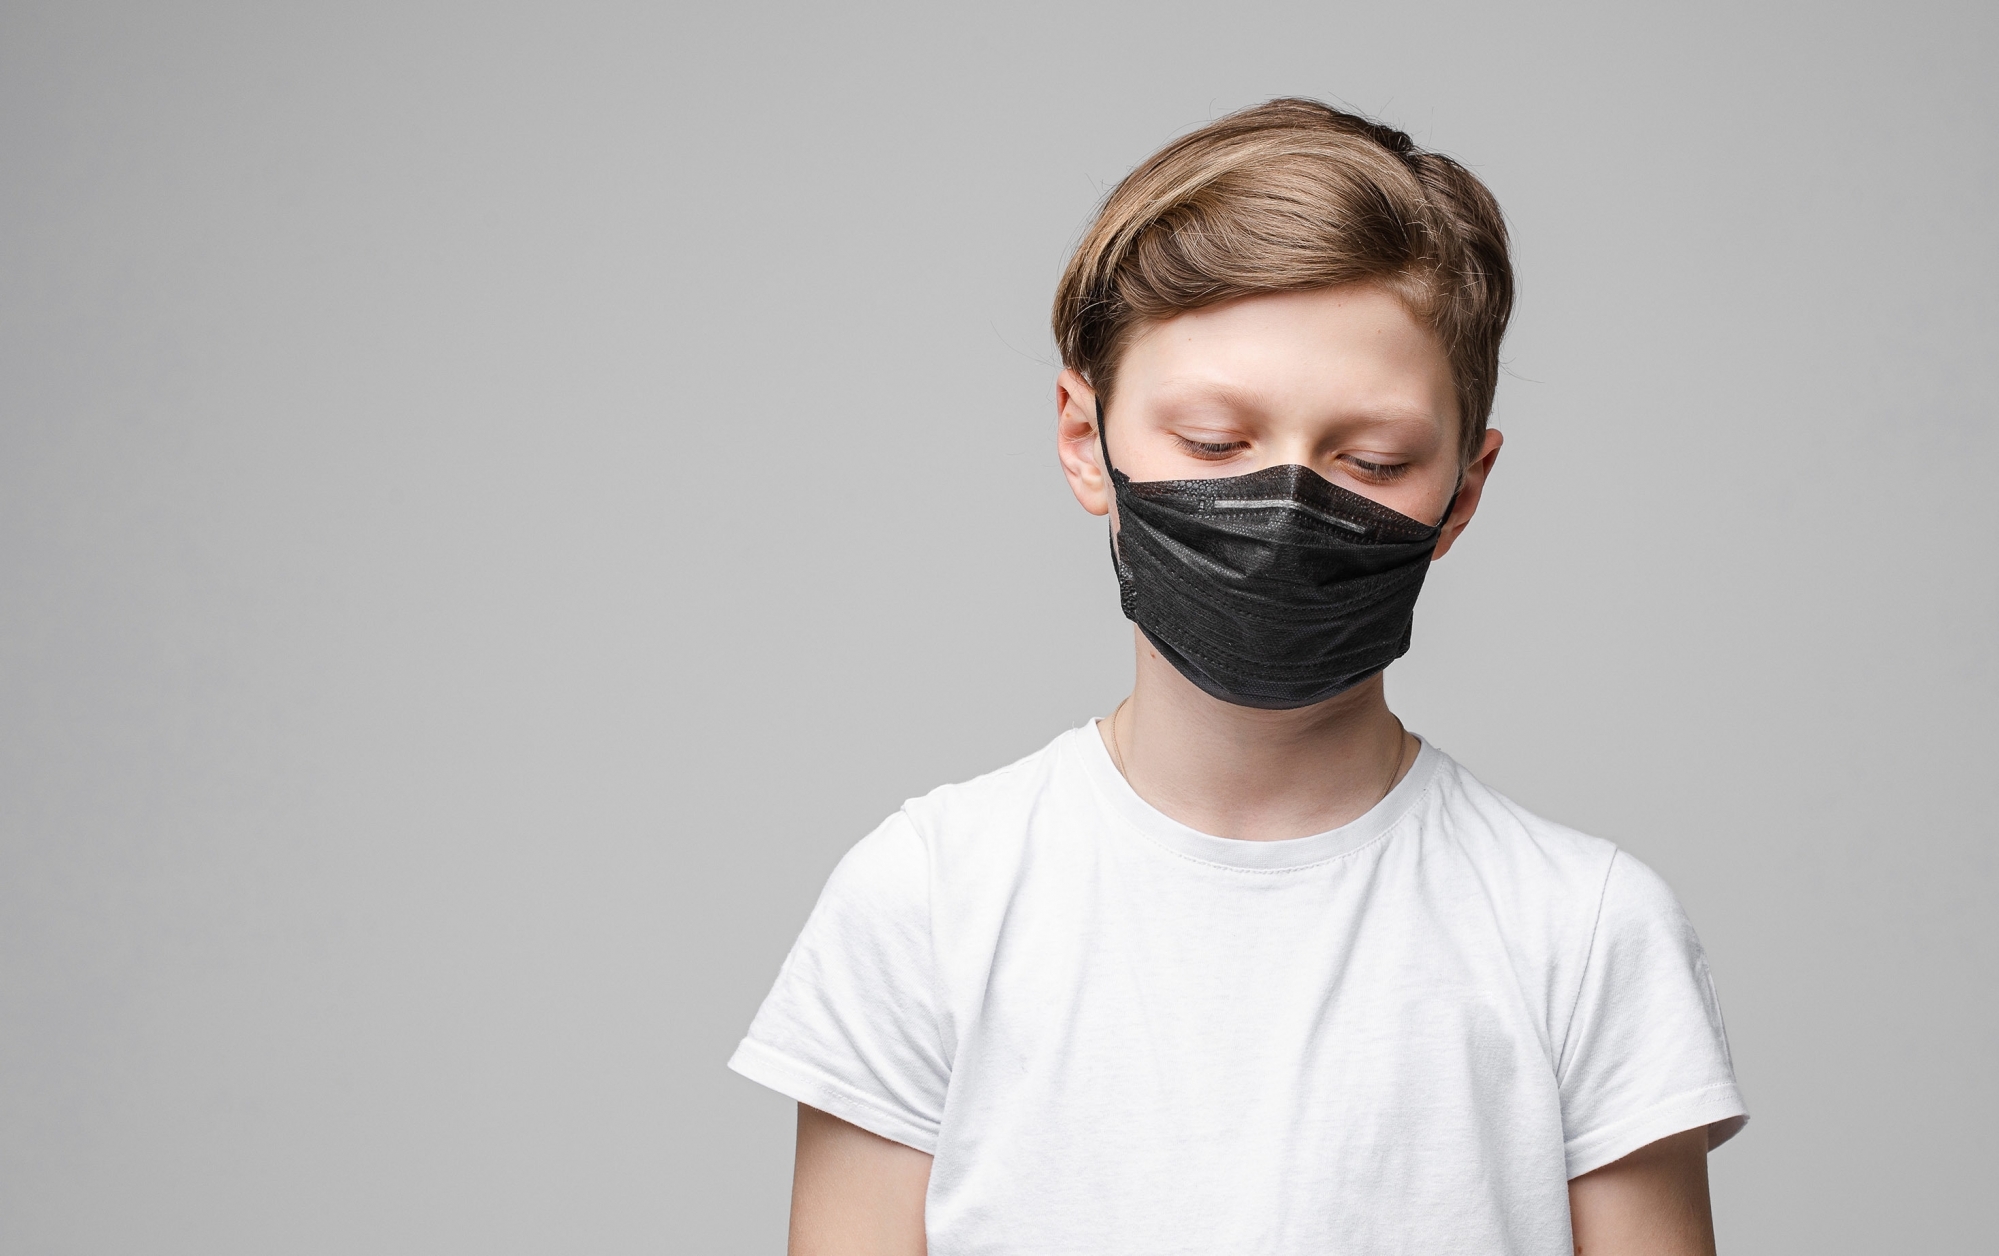 Young beautiful caucasian teenager in white t-shirt, black jeans stands with black medical mask looks down